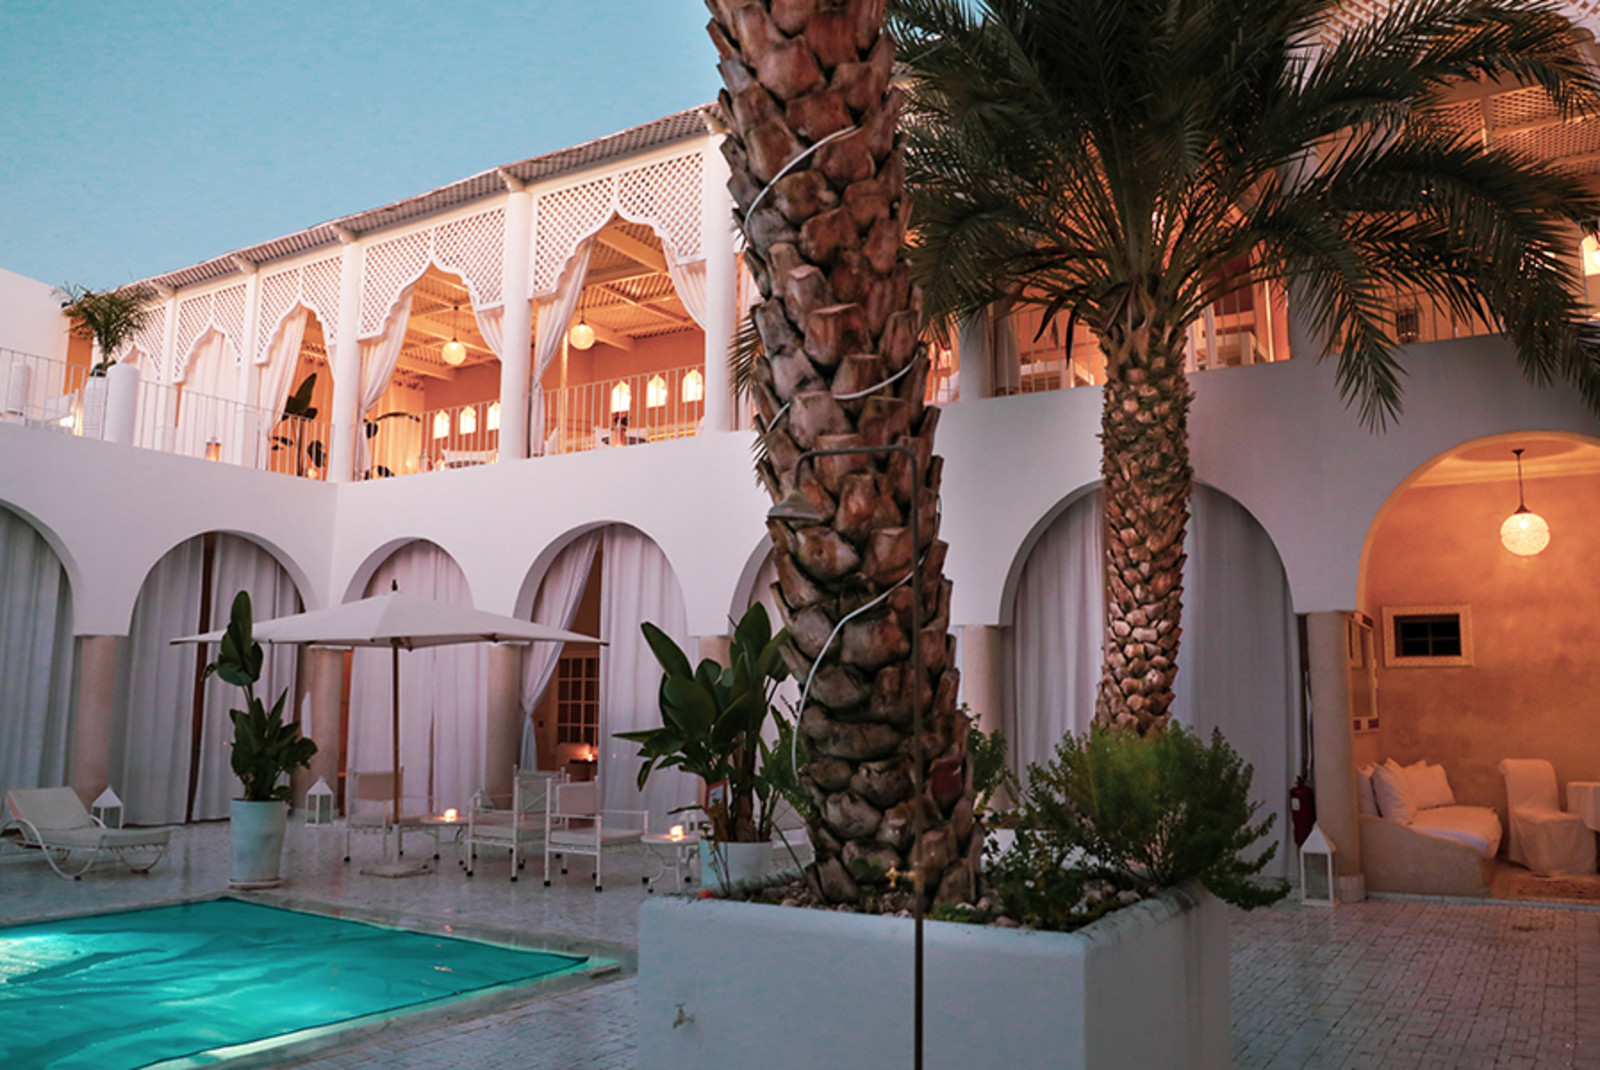 A Relaxing Getaway to Morocco - Day 1: Arrive in Riad Monceau